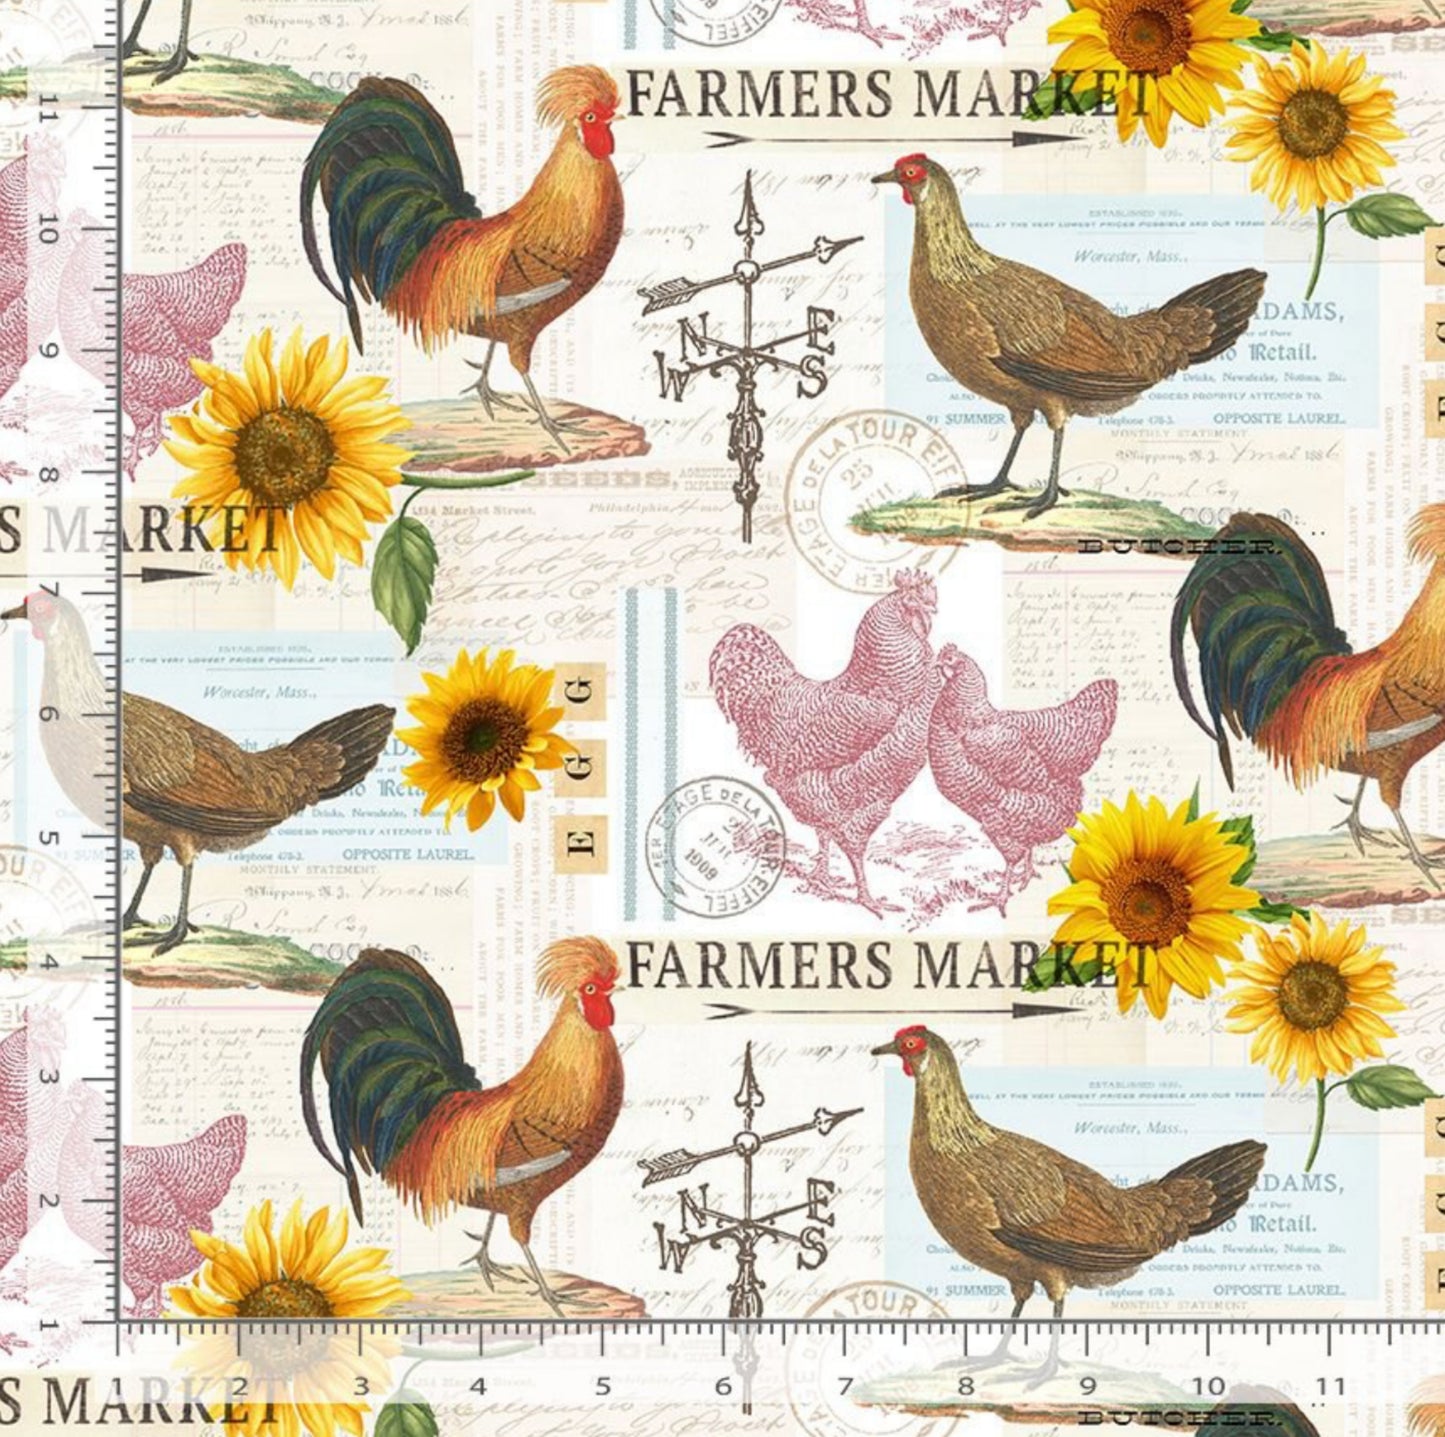 Spring Chickens - Poultry Farmer's Market Fabric - Timeless Treasures Fabrics